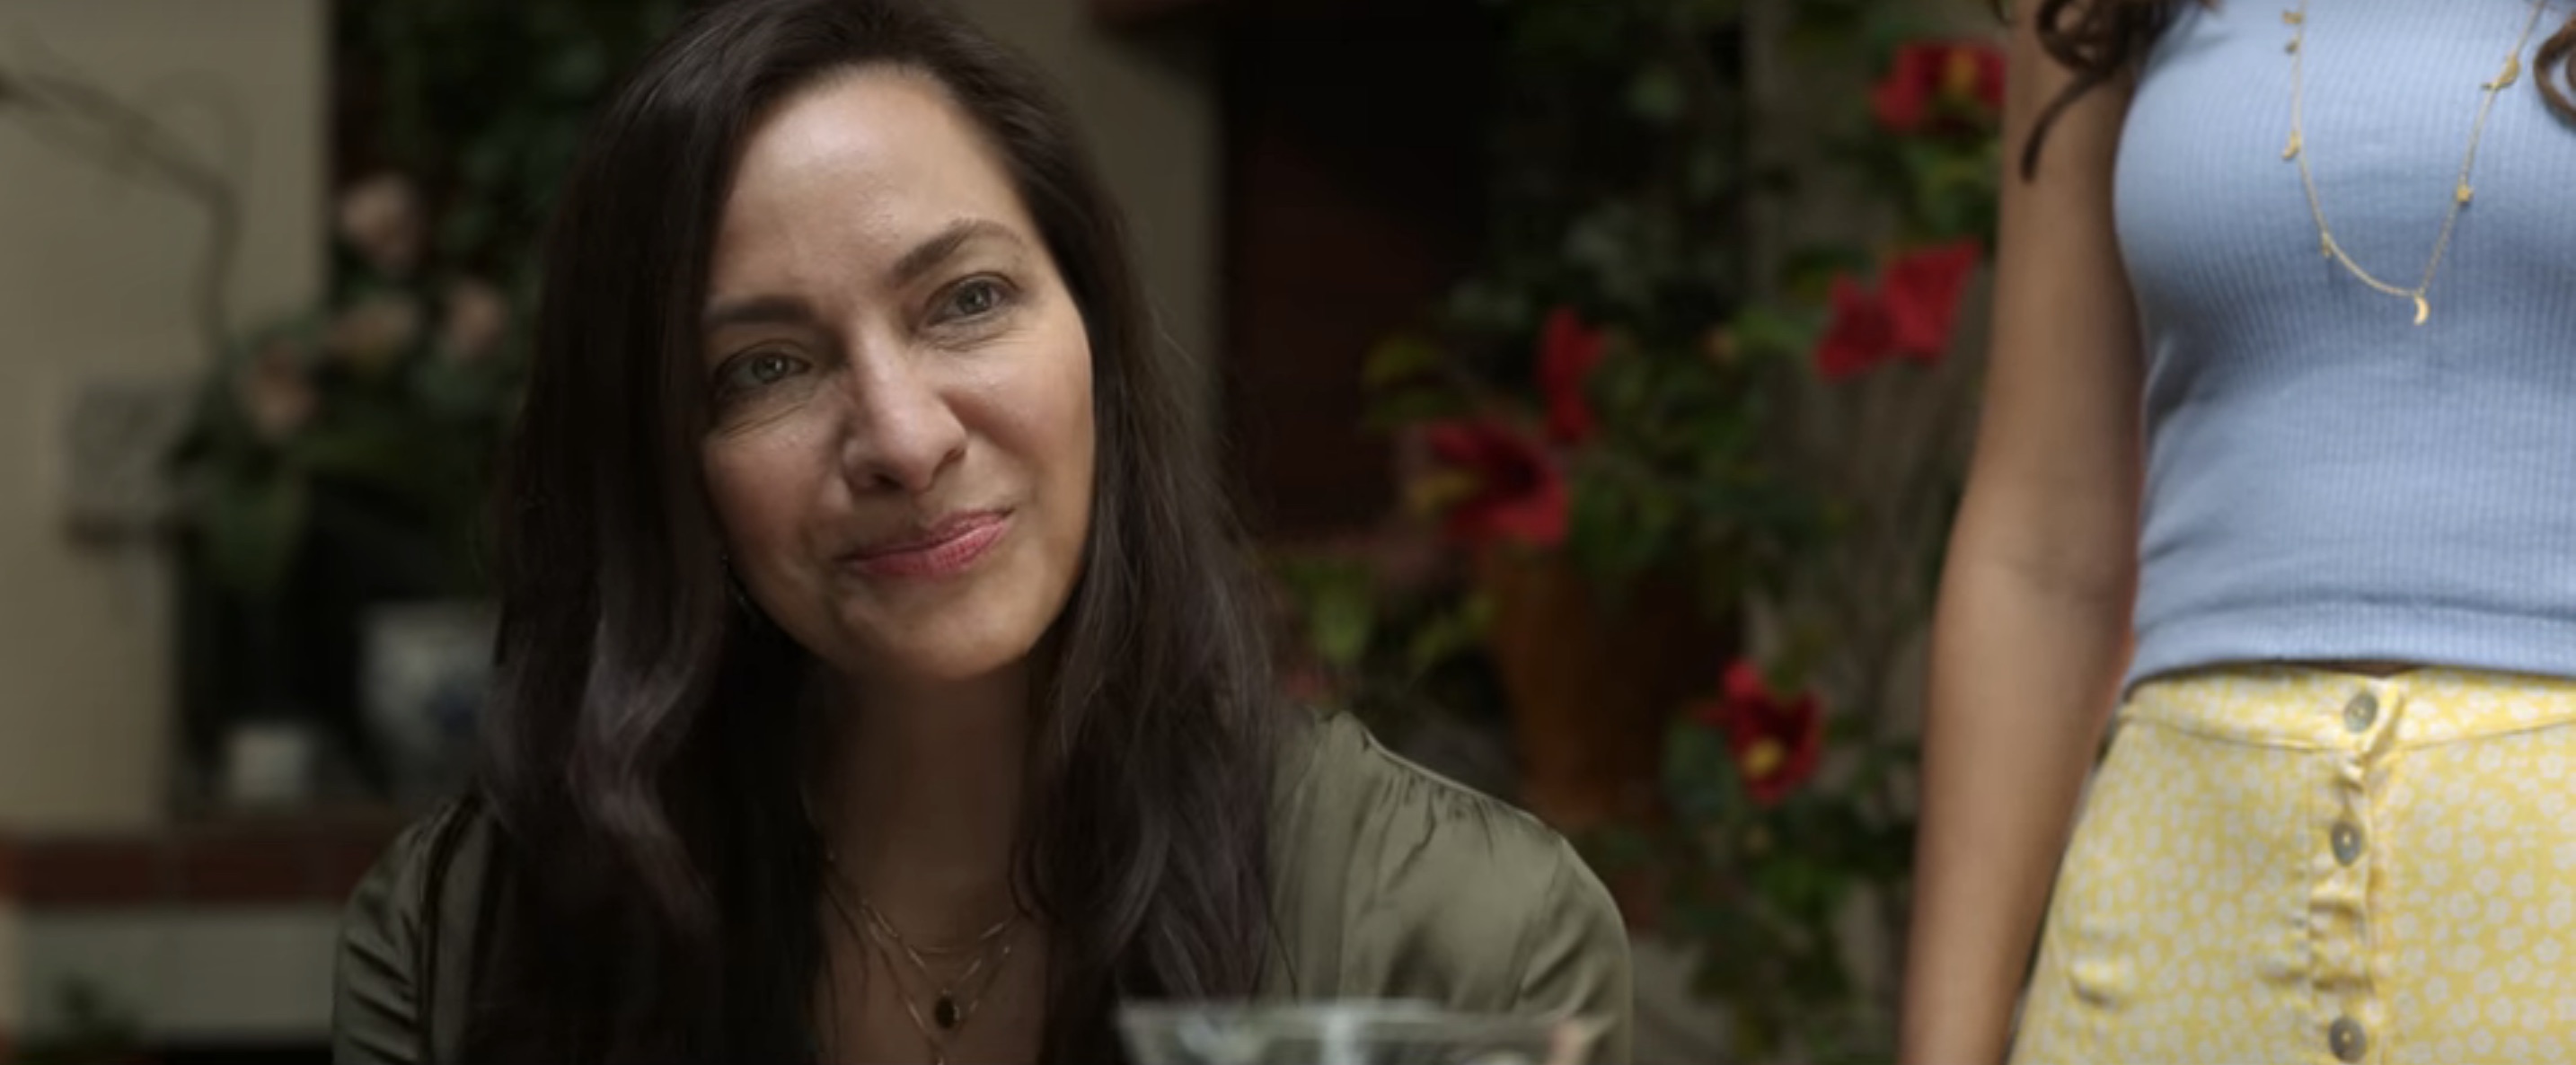 Afterlife of the Party Cast on Netflix - Gloria Garcia as Sofia